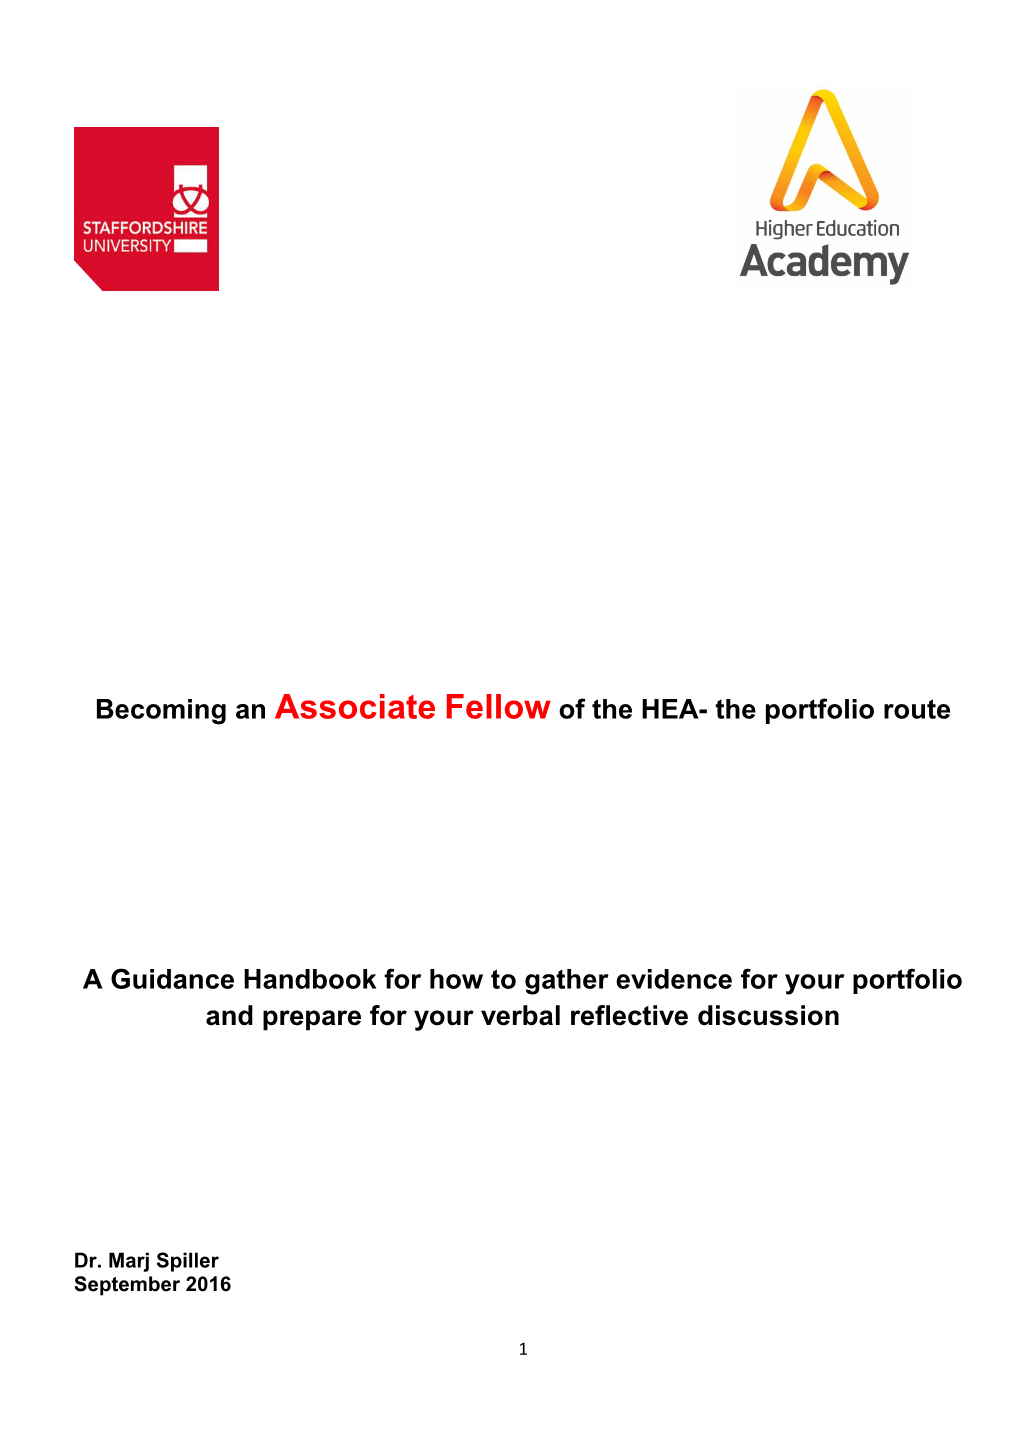 Becoming an Associatefellow of the HEA-The Portfolio Route